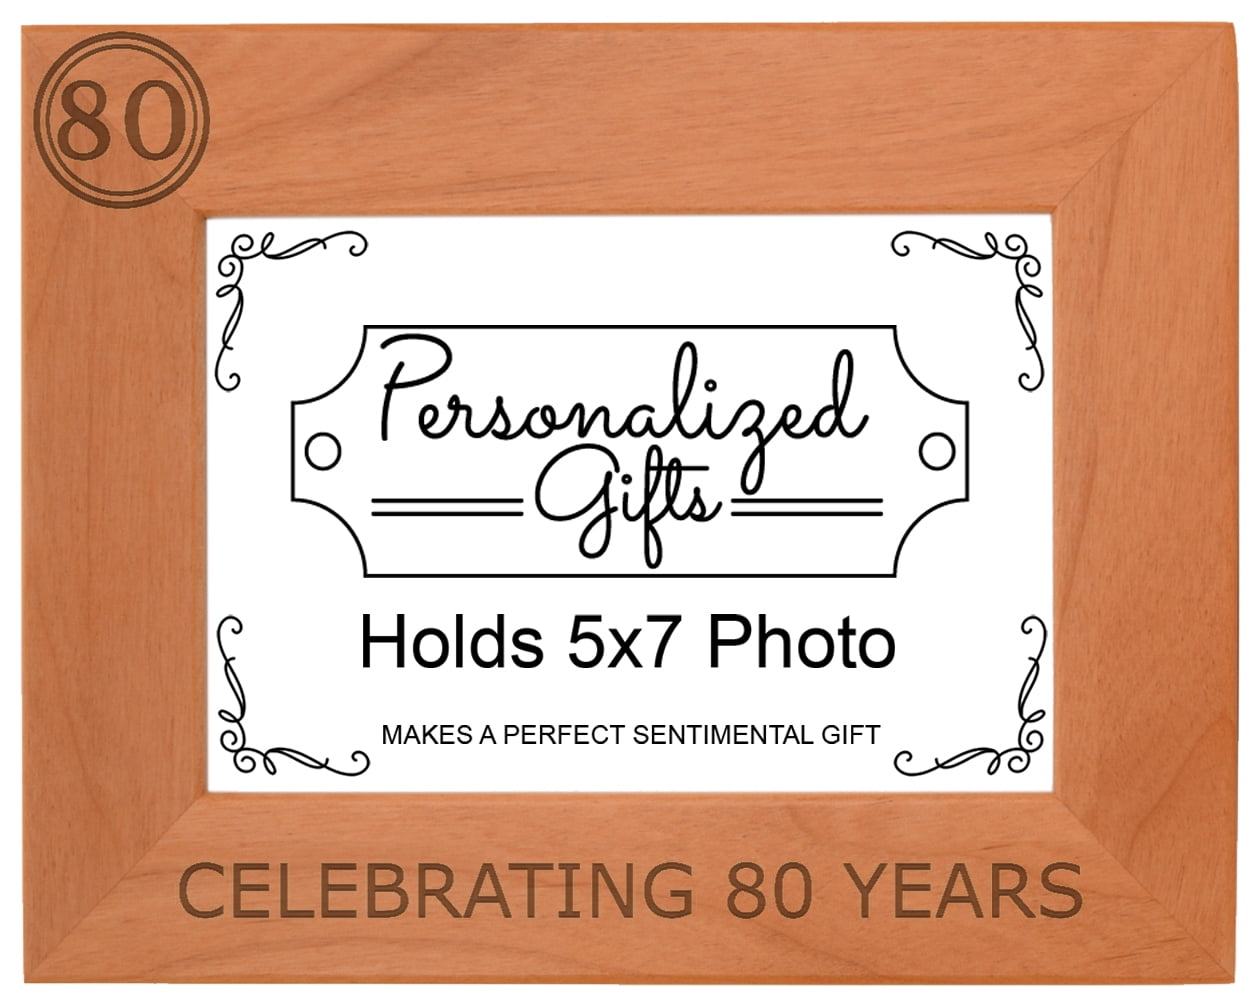 Personalized Gift for ANY Occasion Personalized Picture Frame/Personalized Photo Frame 4x6 5x7 8x6 Engraved Wooden Frames Available 